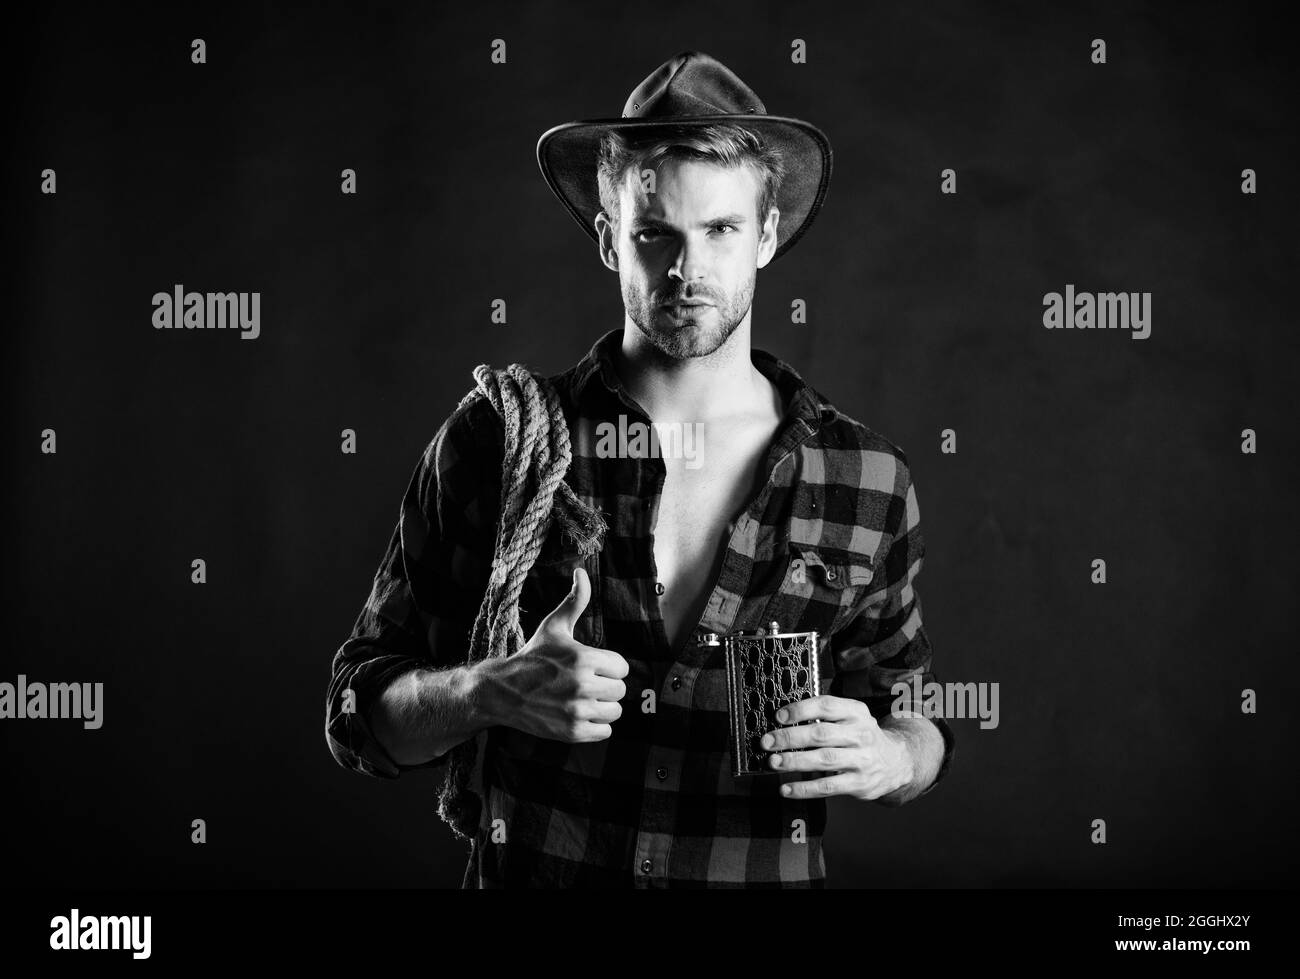 Western culture. Western life. Man wearing hat hold rope and flask. Lasso tool of American cowboy. Man handsome unshaven cowboy black background Stock Photo